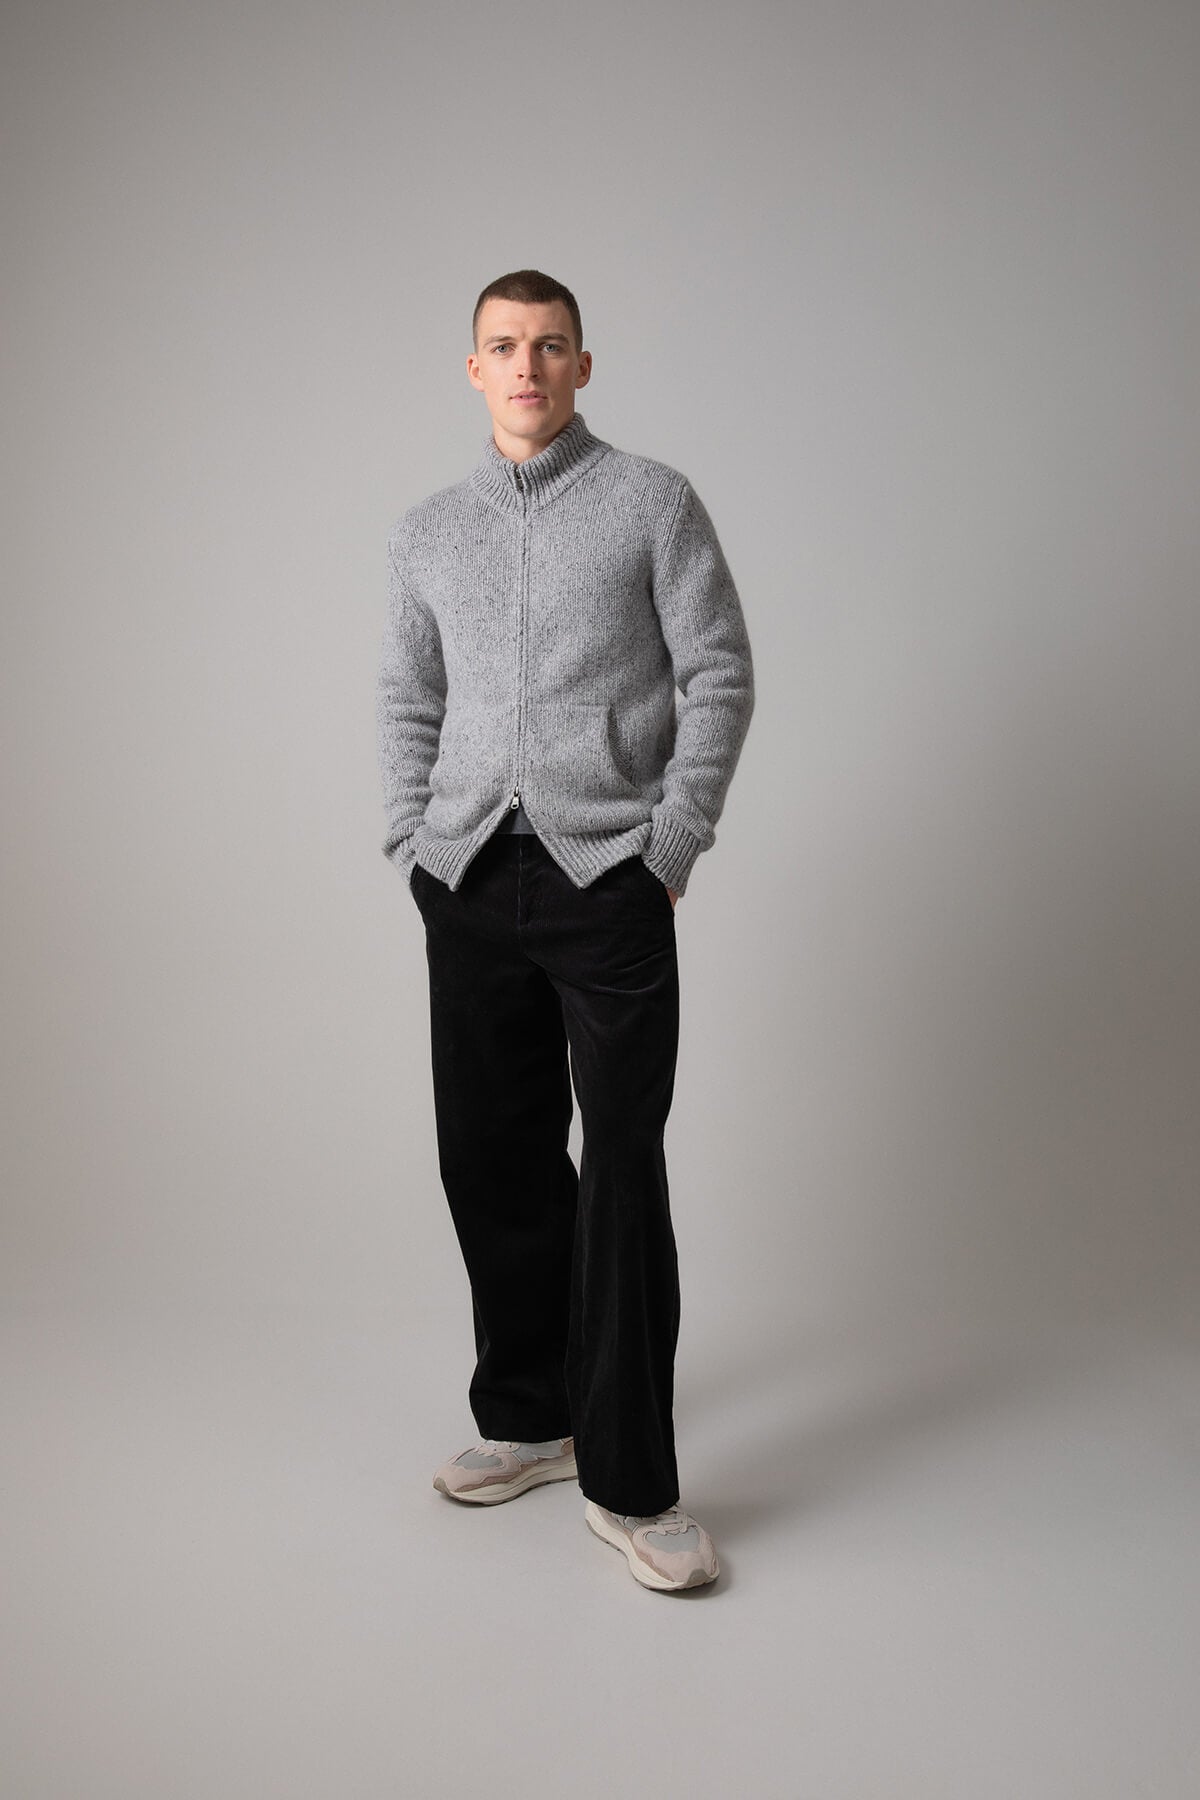 Johnstons of Elgin’s Men's Cashmere Donegal Zip Turtle Neck Cardigan in Light Grey on model wearing black trousers on a grey background KAB05115Q23711